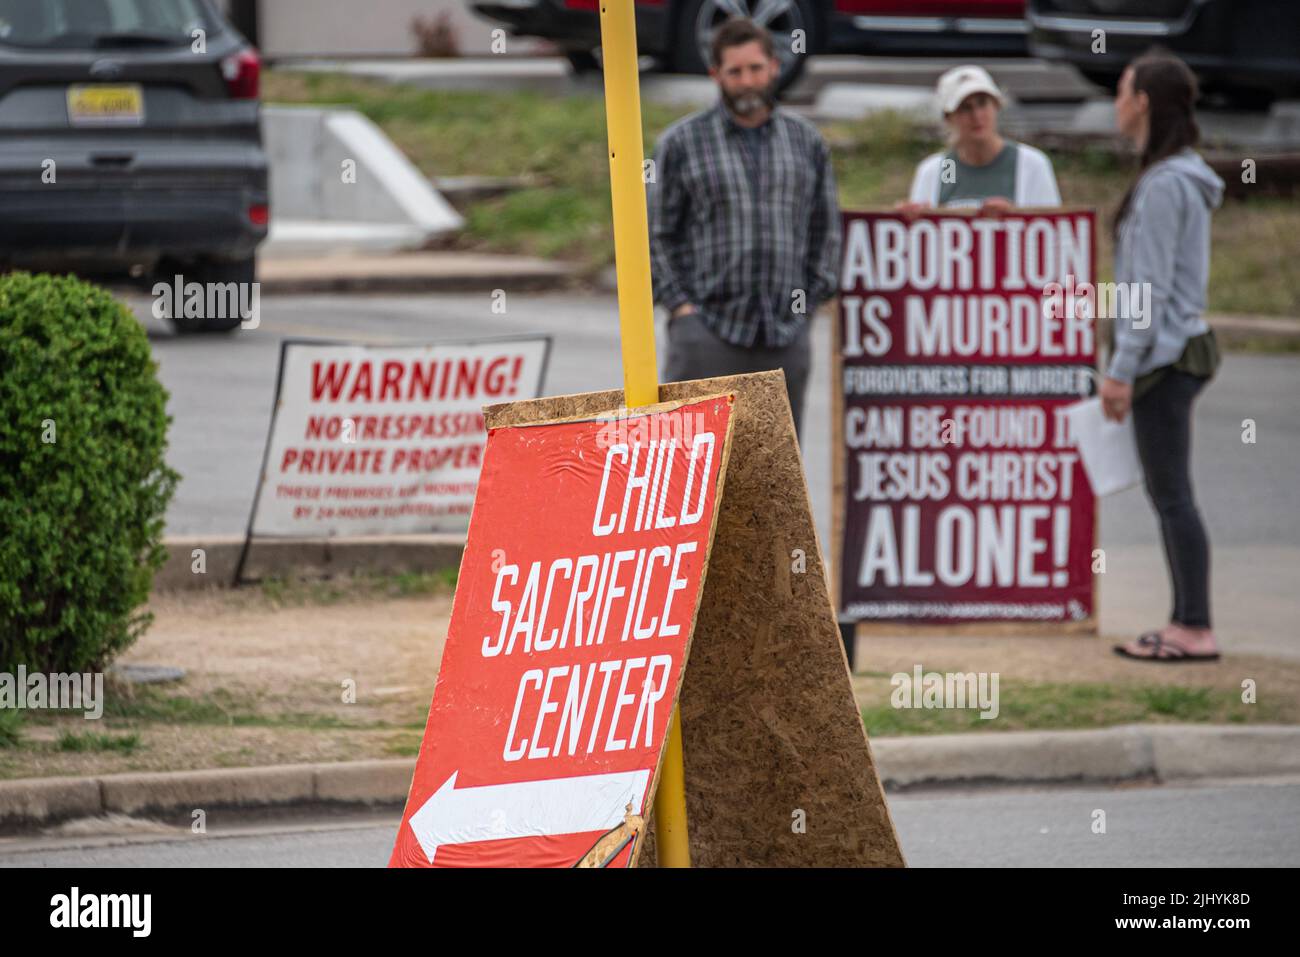 Christians gather outside an abortion facility in Tulsa, Oklahoma, to dissuade mothers from killing their babies, to offer help to the parents, to educate those deceived by abortion myths, and to pray for all involved. (USA) Stock Photo